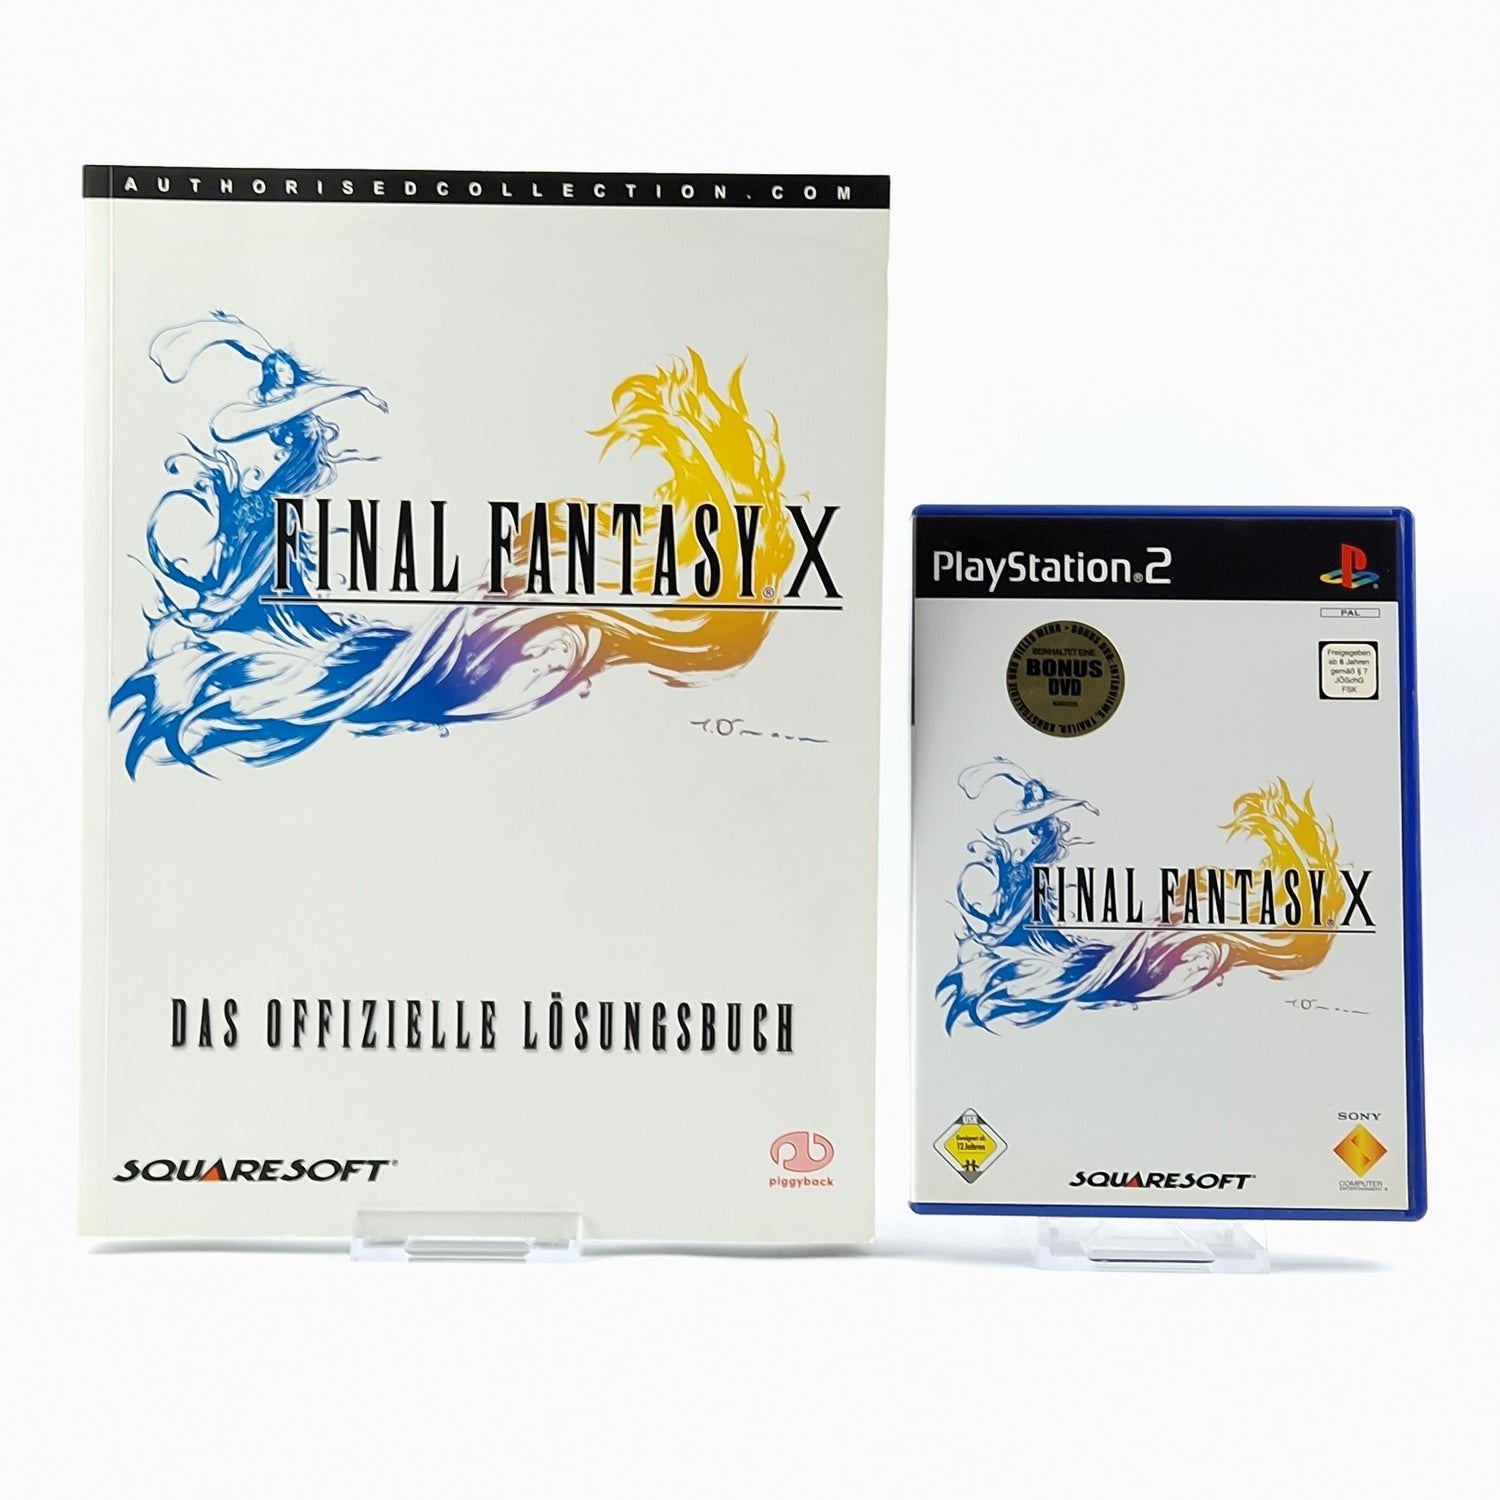 Playstation 2 game: Final Fantasy X + solution book game advisor - SONY PS2 original packaging